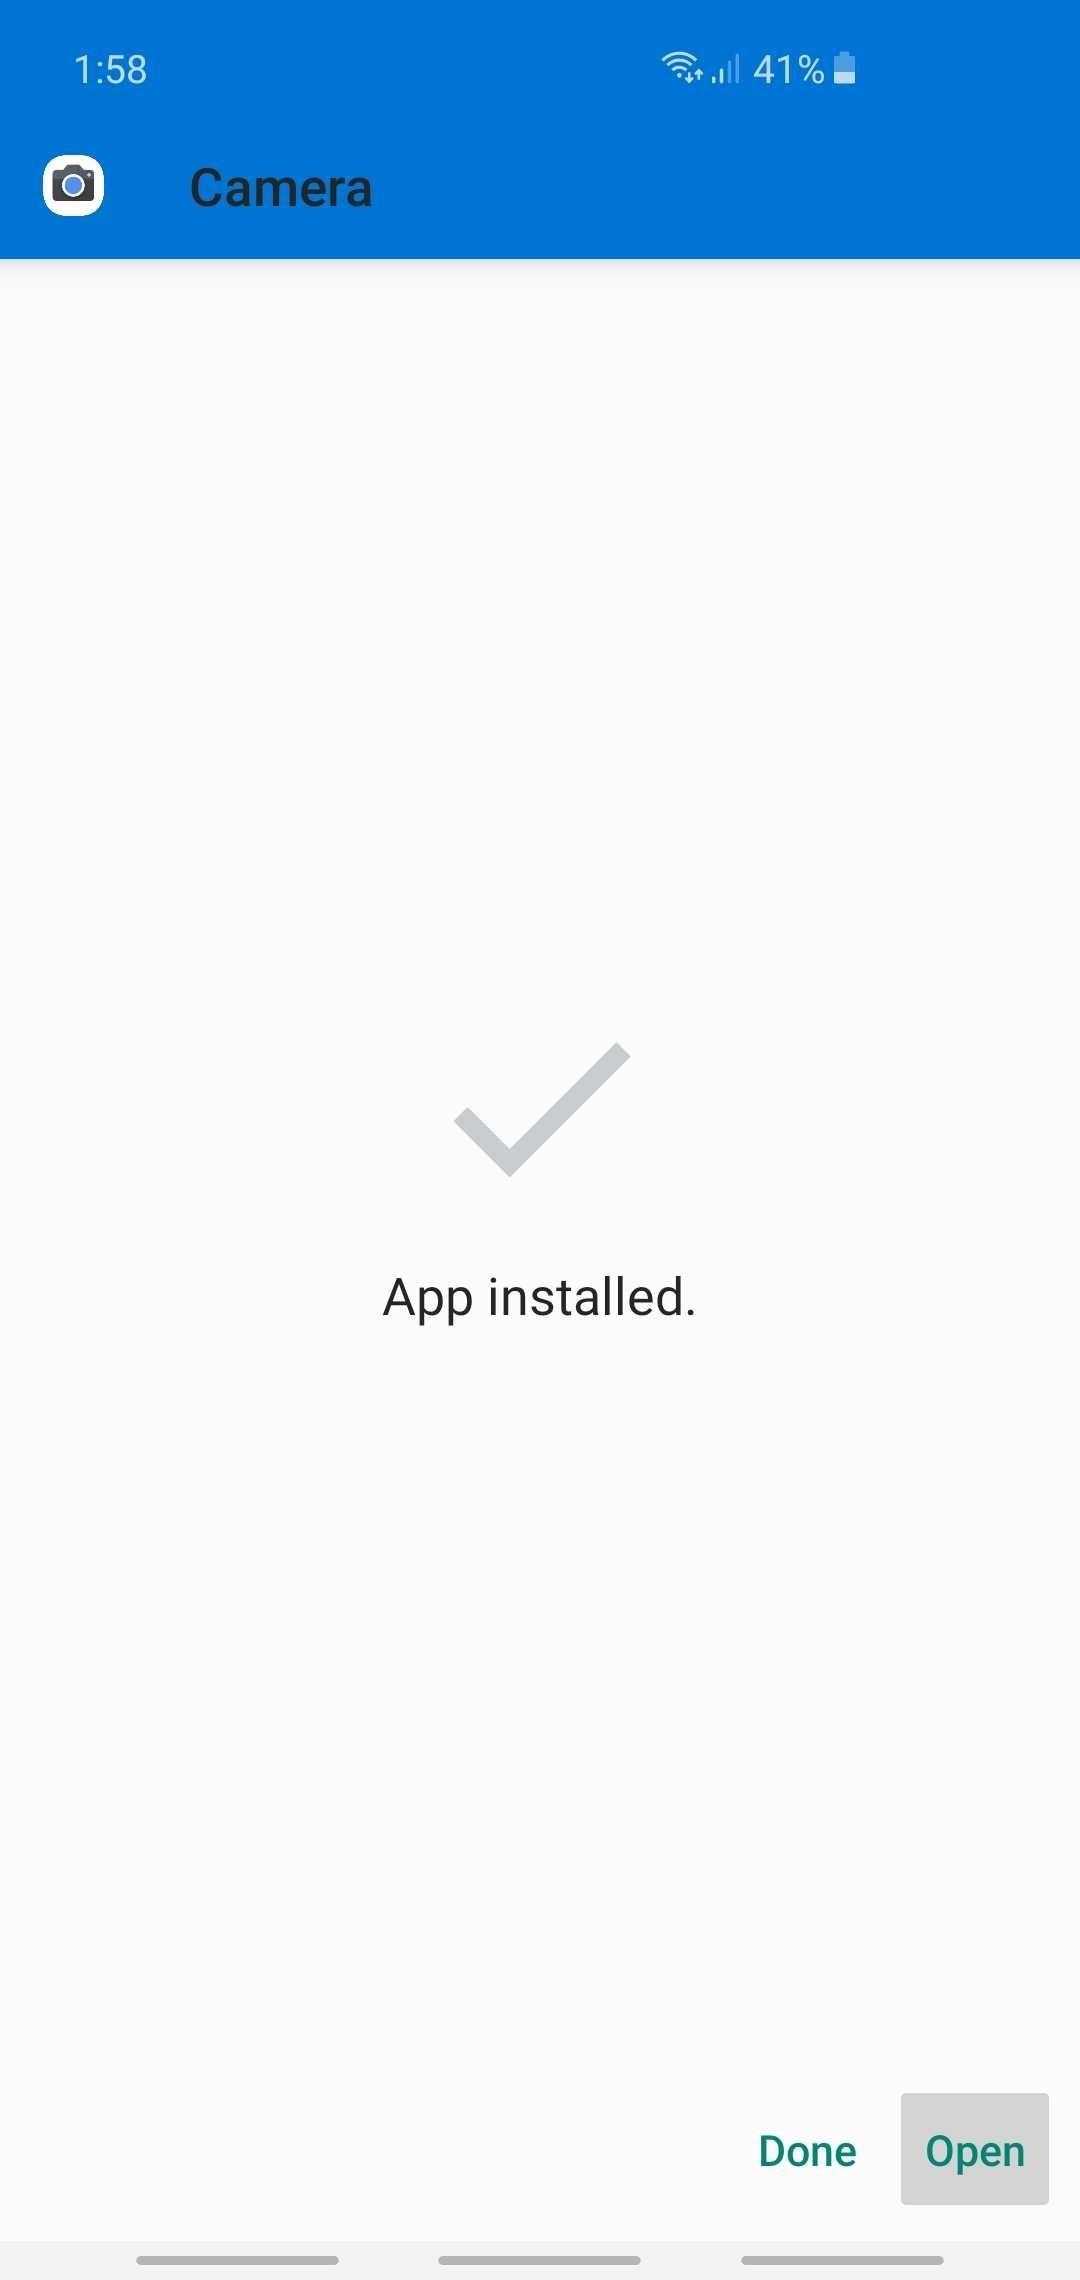 How to Install Google Camera on Your Galaxy S10 for Better Photos & Videos